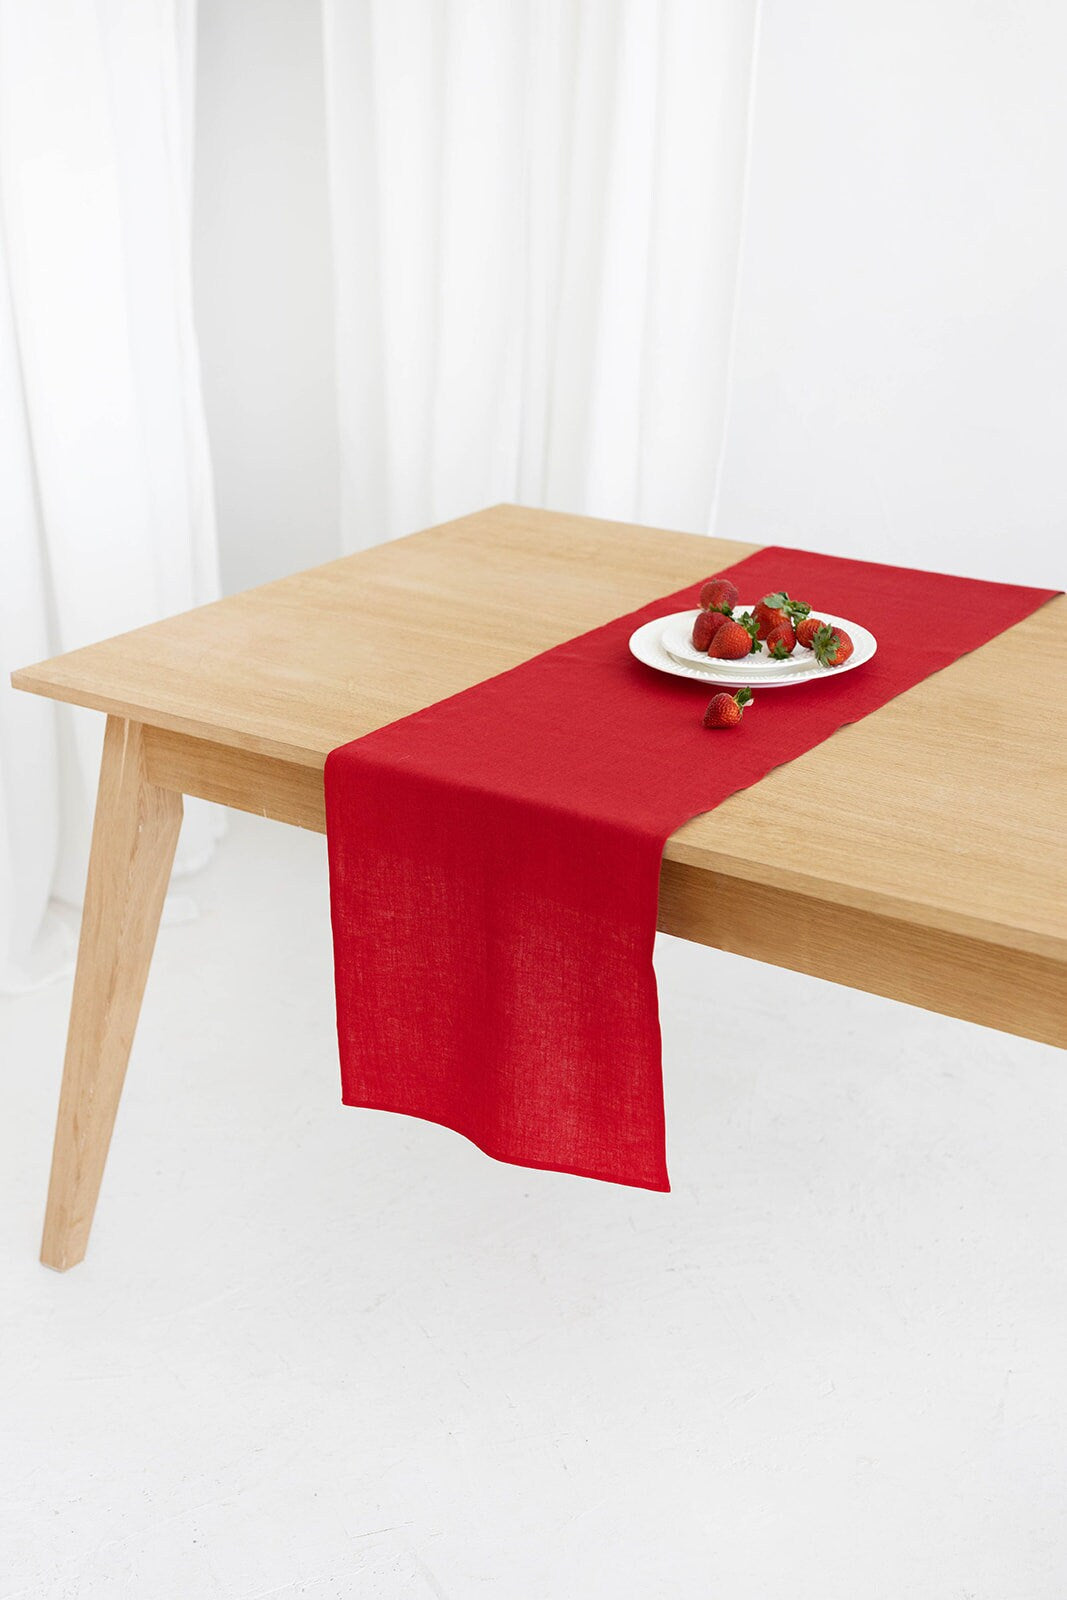 Red Color Linen Table Runner On Table 1 - Daily Linen